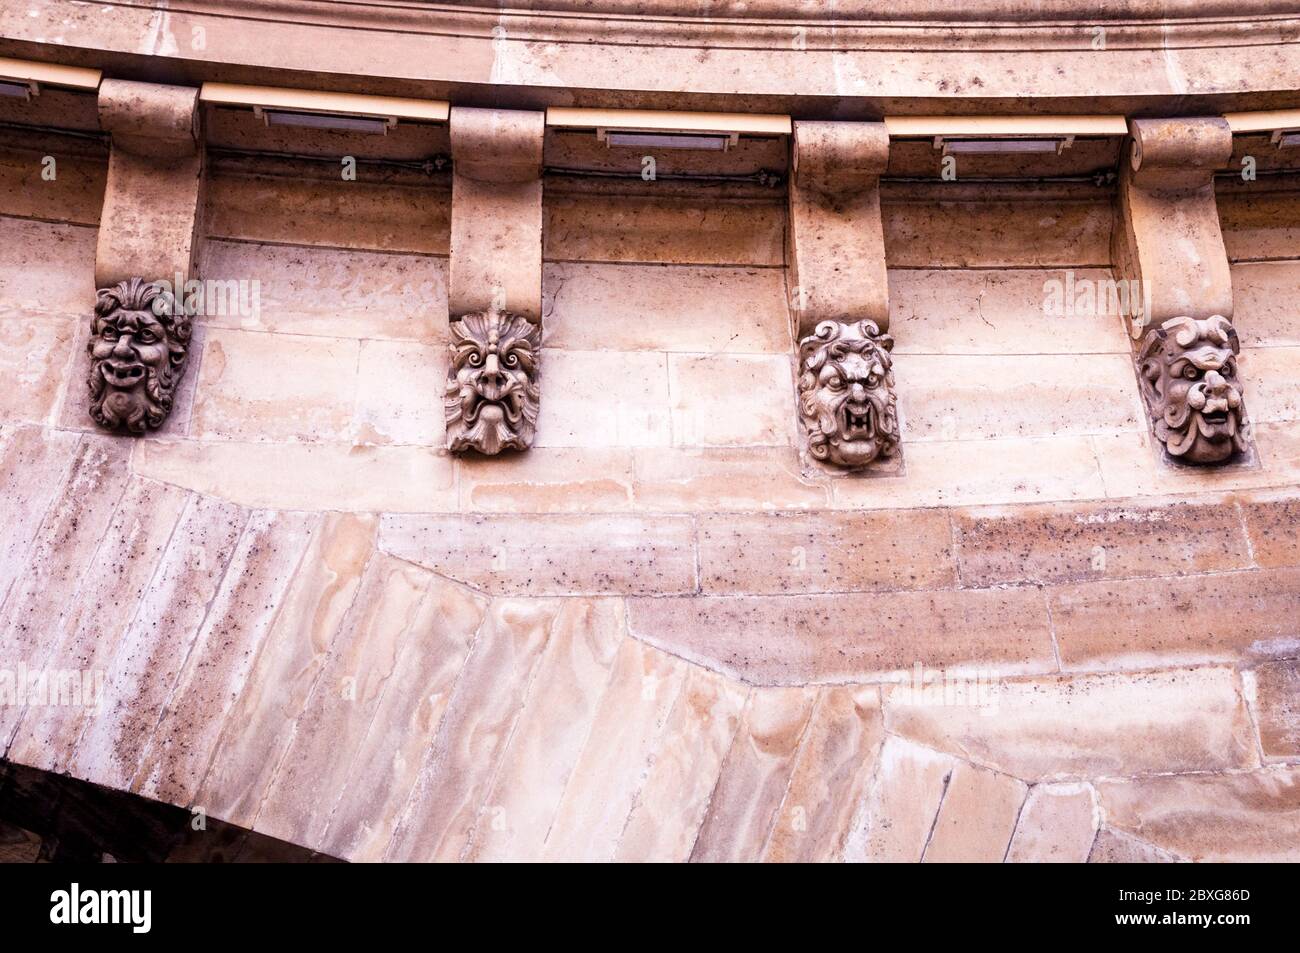 Grotesques, or mascarons, line the Pont Neuf bridge in Paris, France, a unique architectural detail, originally created to warn off evil spirits. Stock Photo